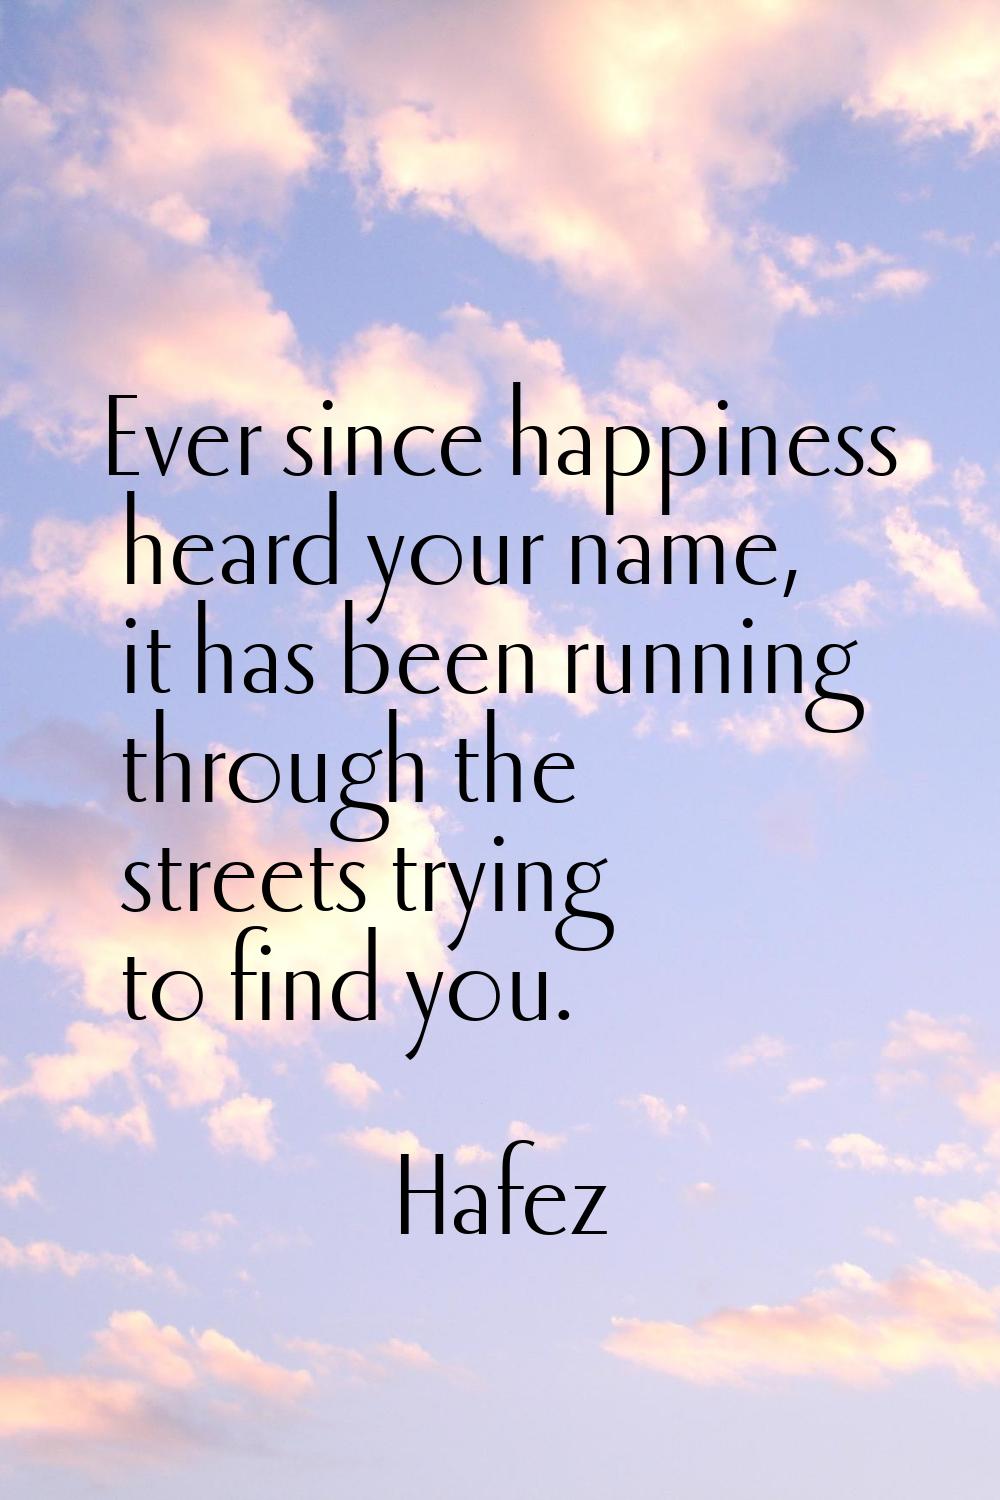 Ever since happiness heard your name, it has been running through the streets trying to find you.